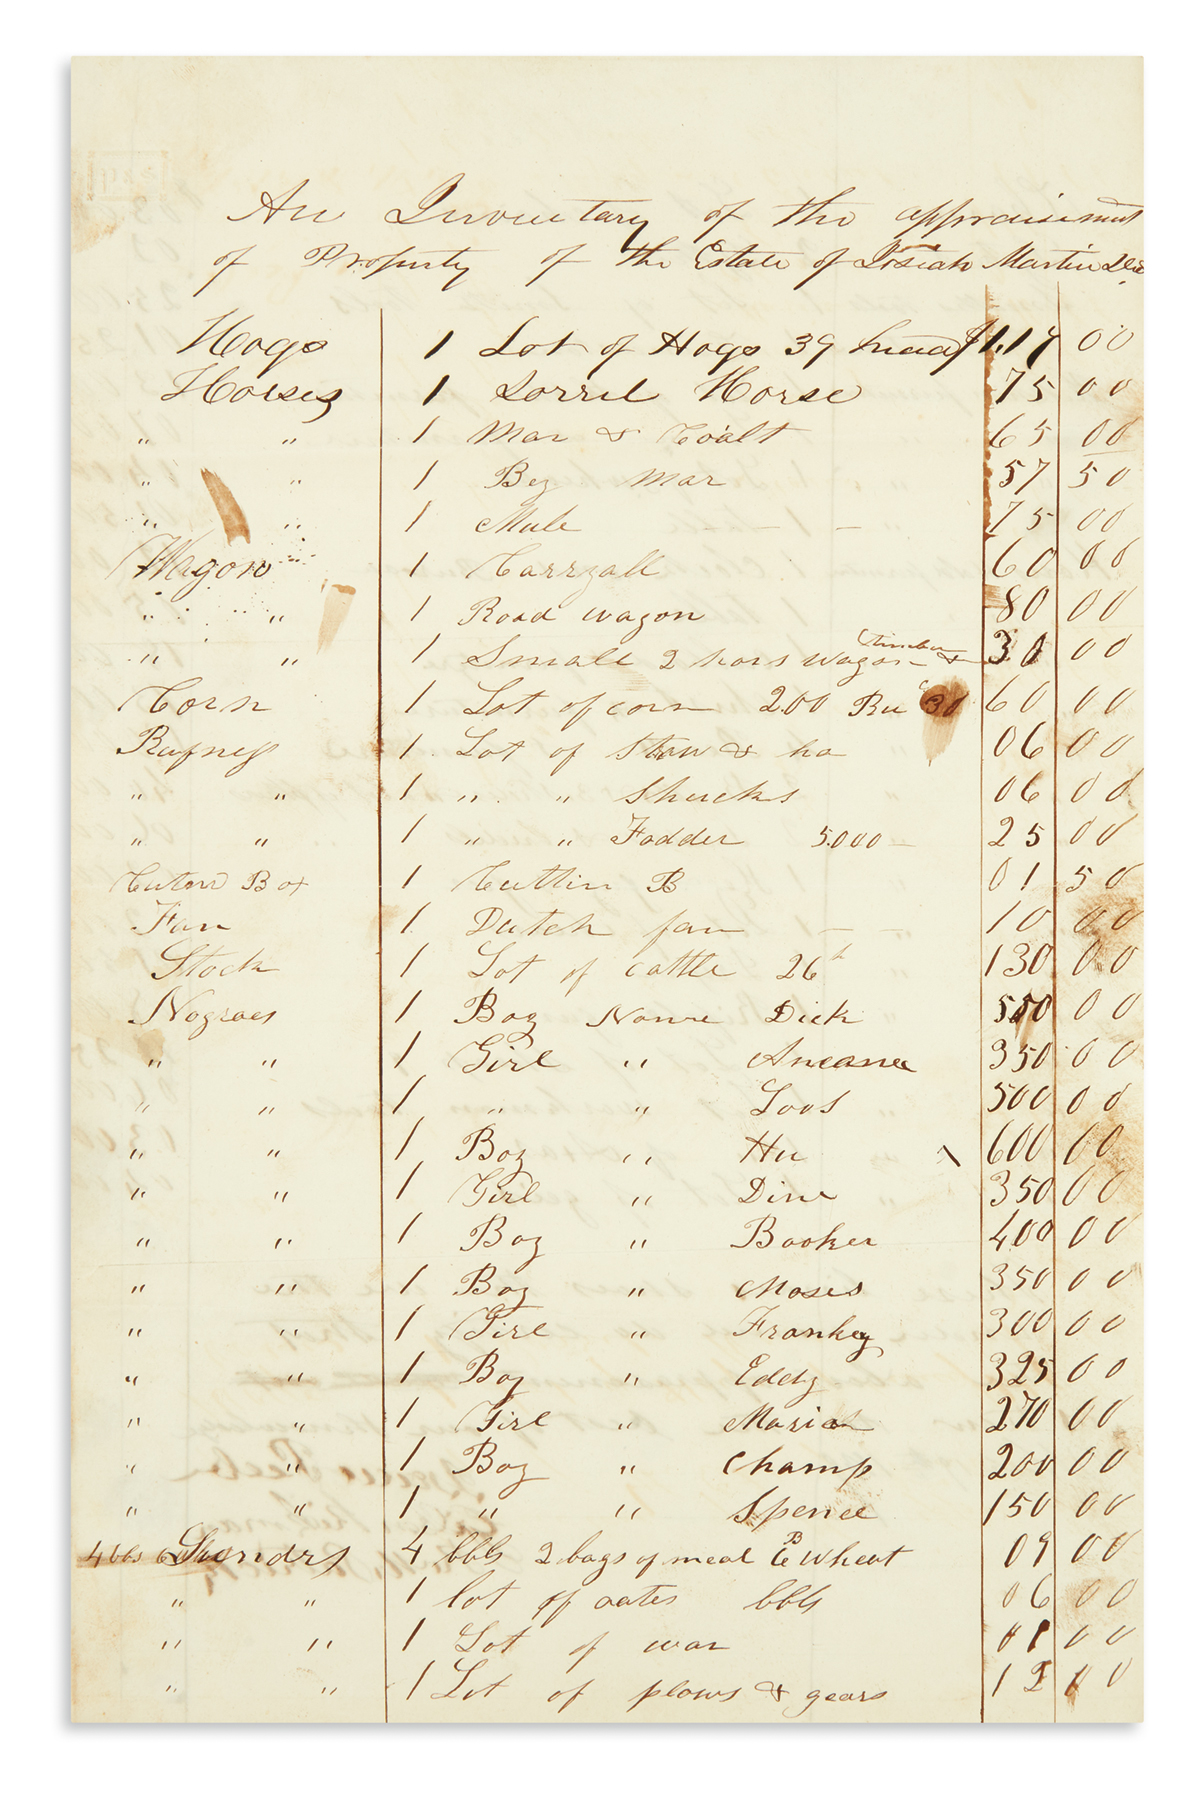 (SLAVERY AND ABOLITION.) Group of 7 estate inventories including slaves.